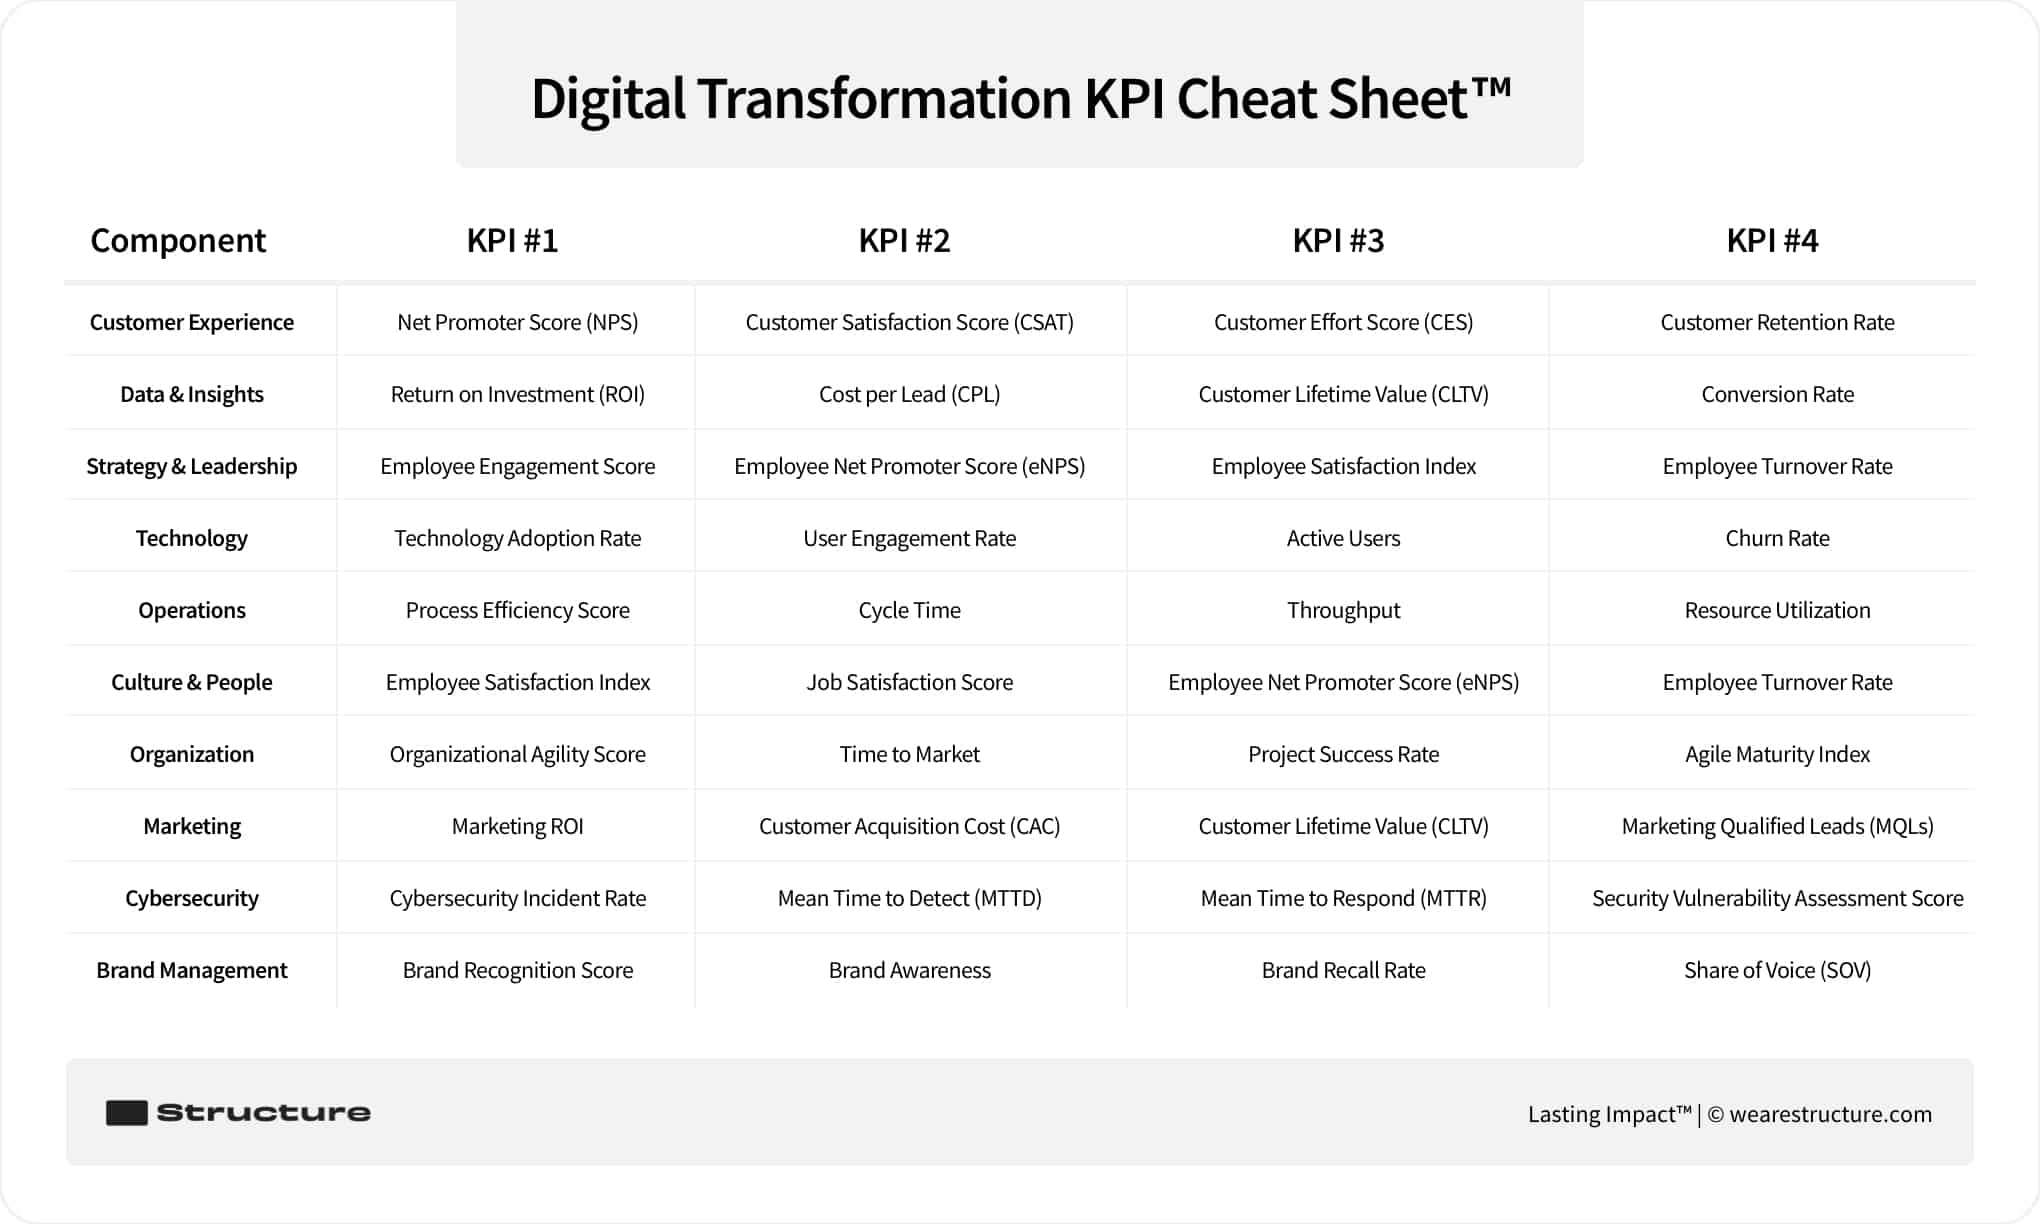 A detailed cheat sheet displaying various digital transformation KPIs, including NPS, ROI, Employee Engagement, Technology Adoption, and more.